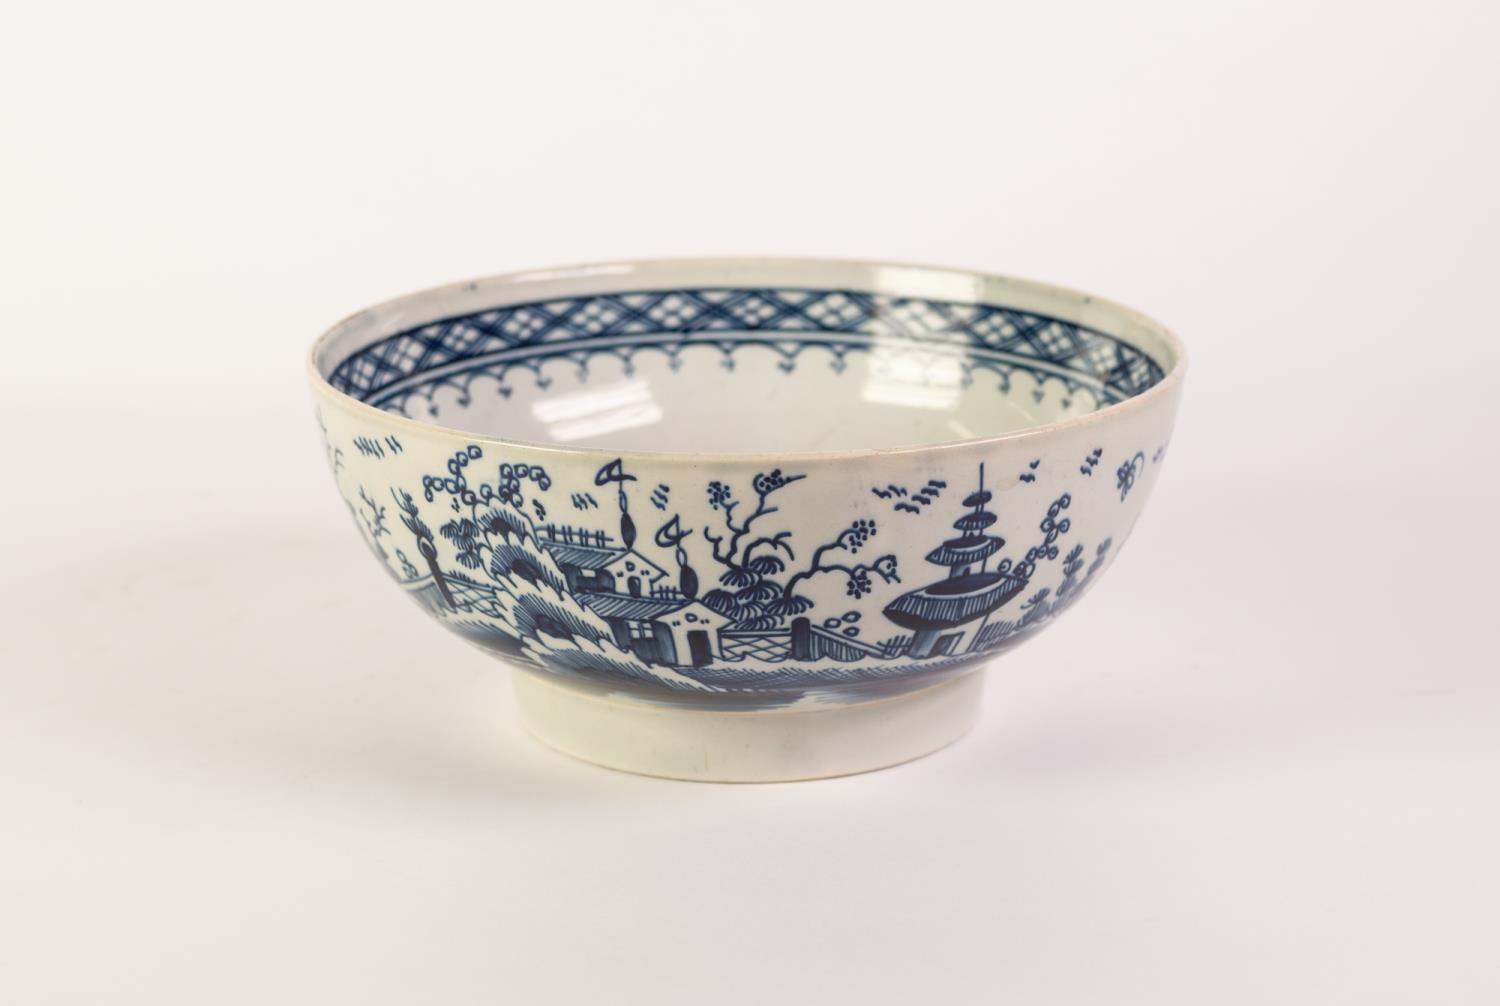 LATE 18th CENTURY, PROBABLY LIVERPOOL, PEARLWARE BOWL painted in underglaze blue with an, almost